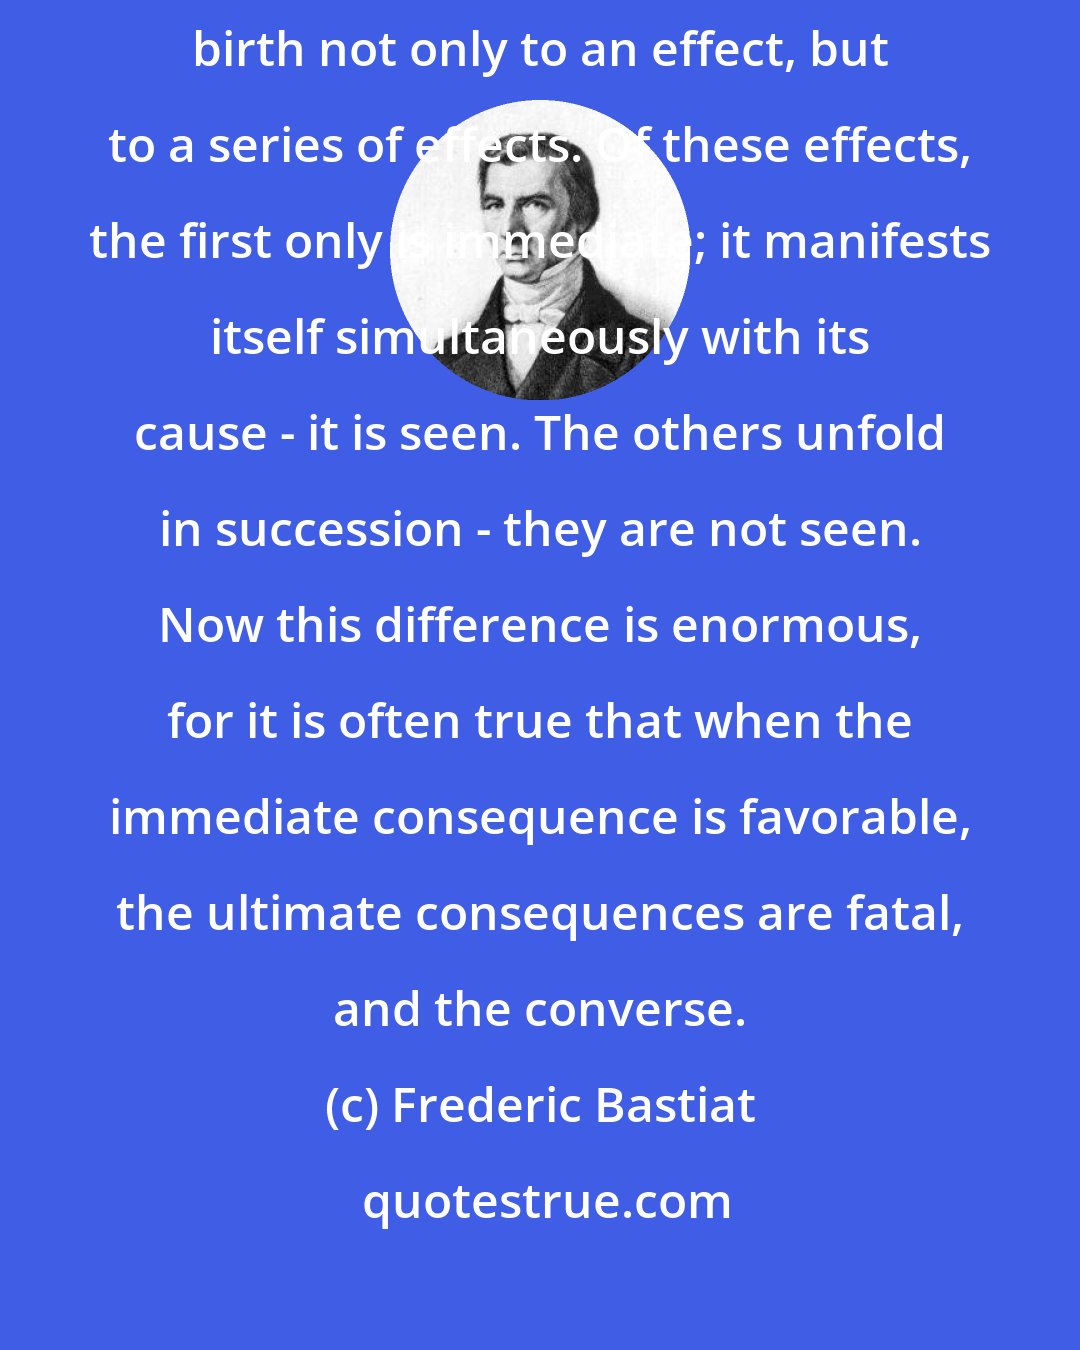 Frederic Bastiat: In an economy, an act, a habit, an institution, or a law, gives birth not only to an effect, but to a series of effects. Of these effects, the first only is immediate; it manifests itself simultaneously with its cause - it is seen. The others unfold in succession - they are not seen. Now this difference is enormous, for it is often true that when the immediate consequence is favorable, the ultimate consequences are fatal, and the converse.